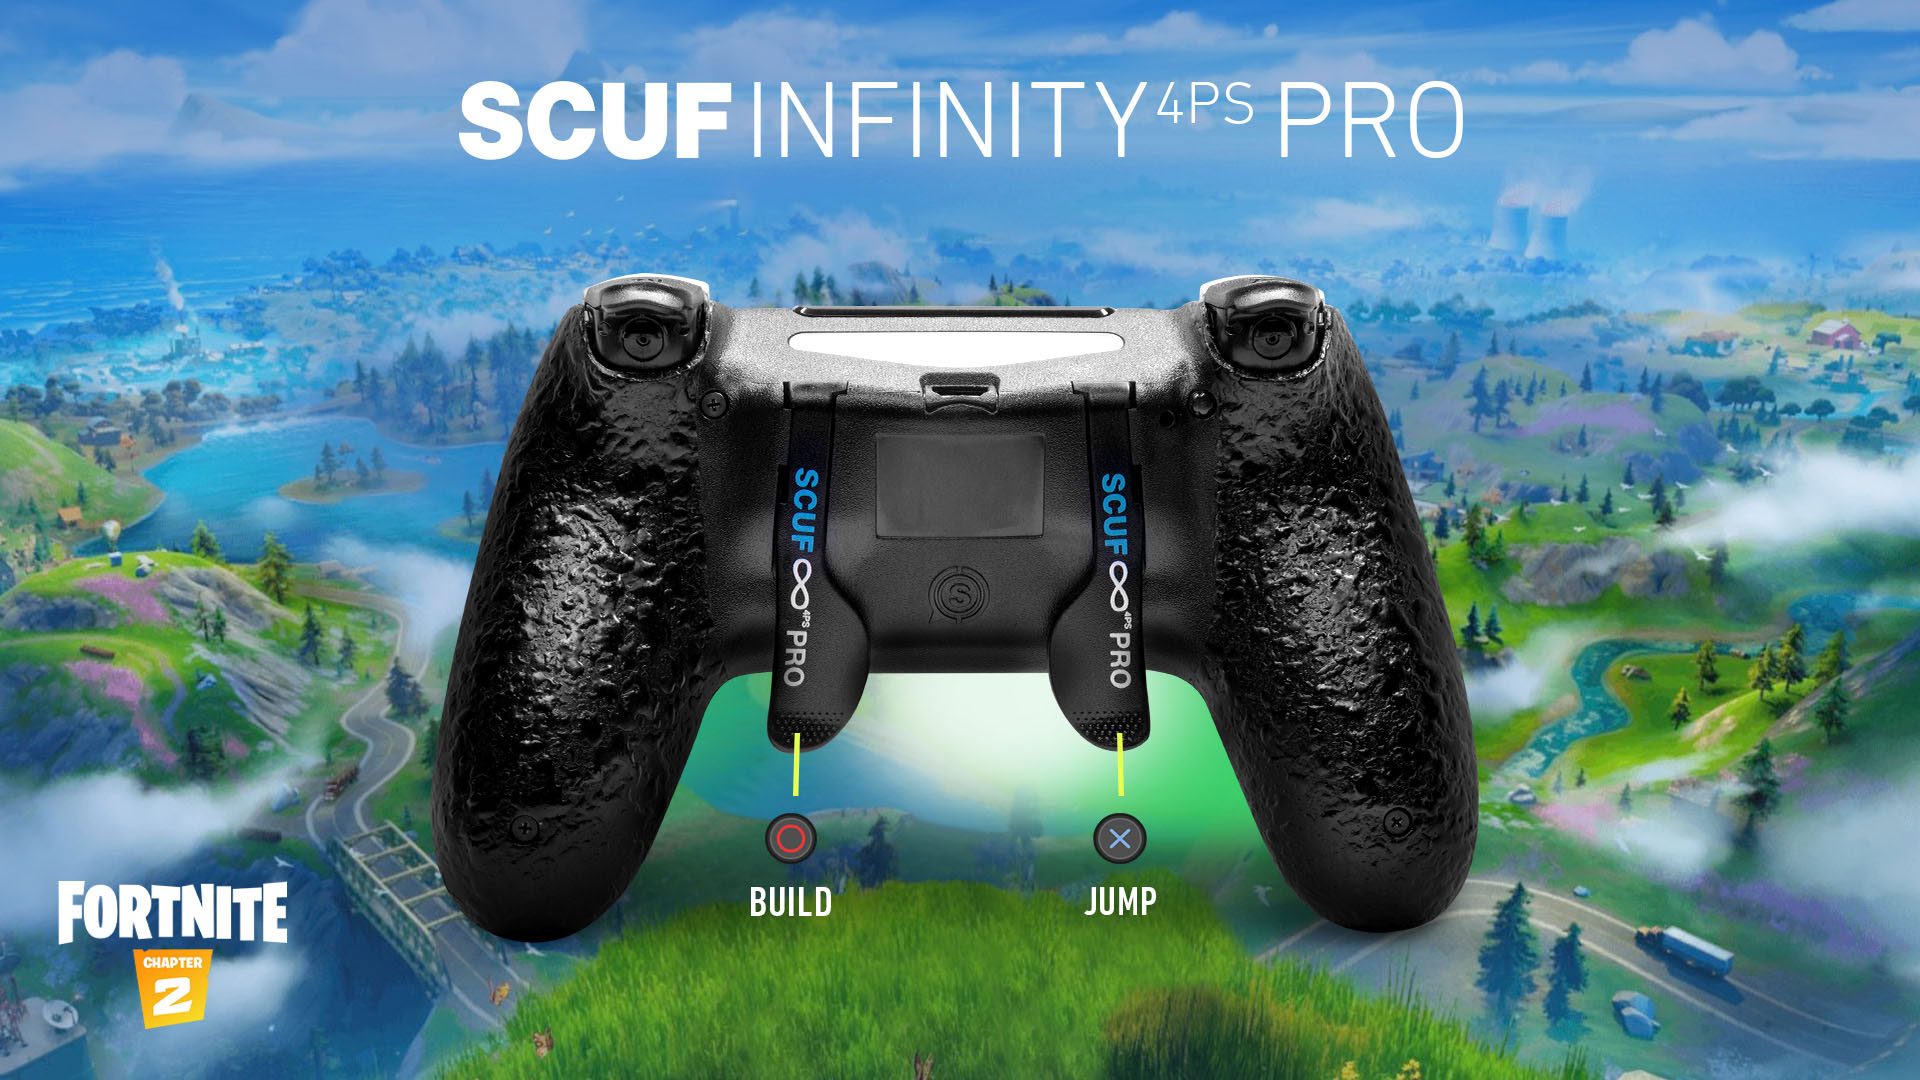 SCUF Infinity4PSPRO Fortnite Controller Set Up